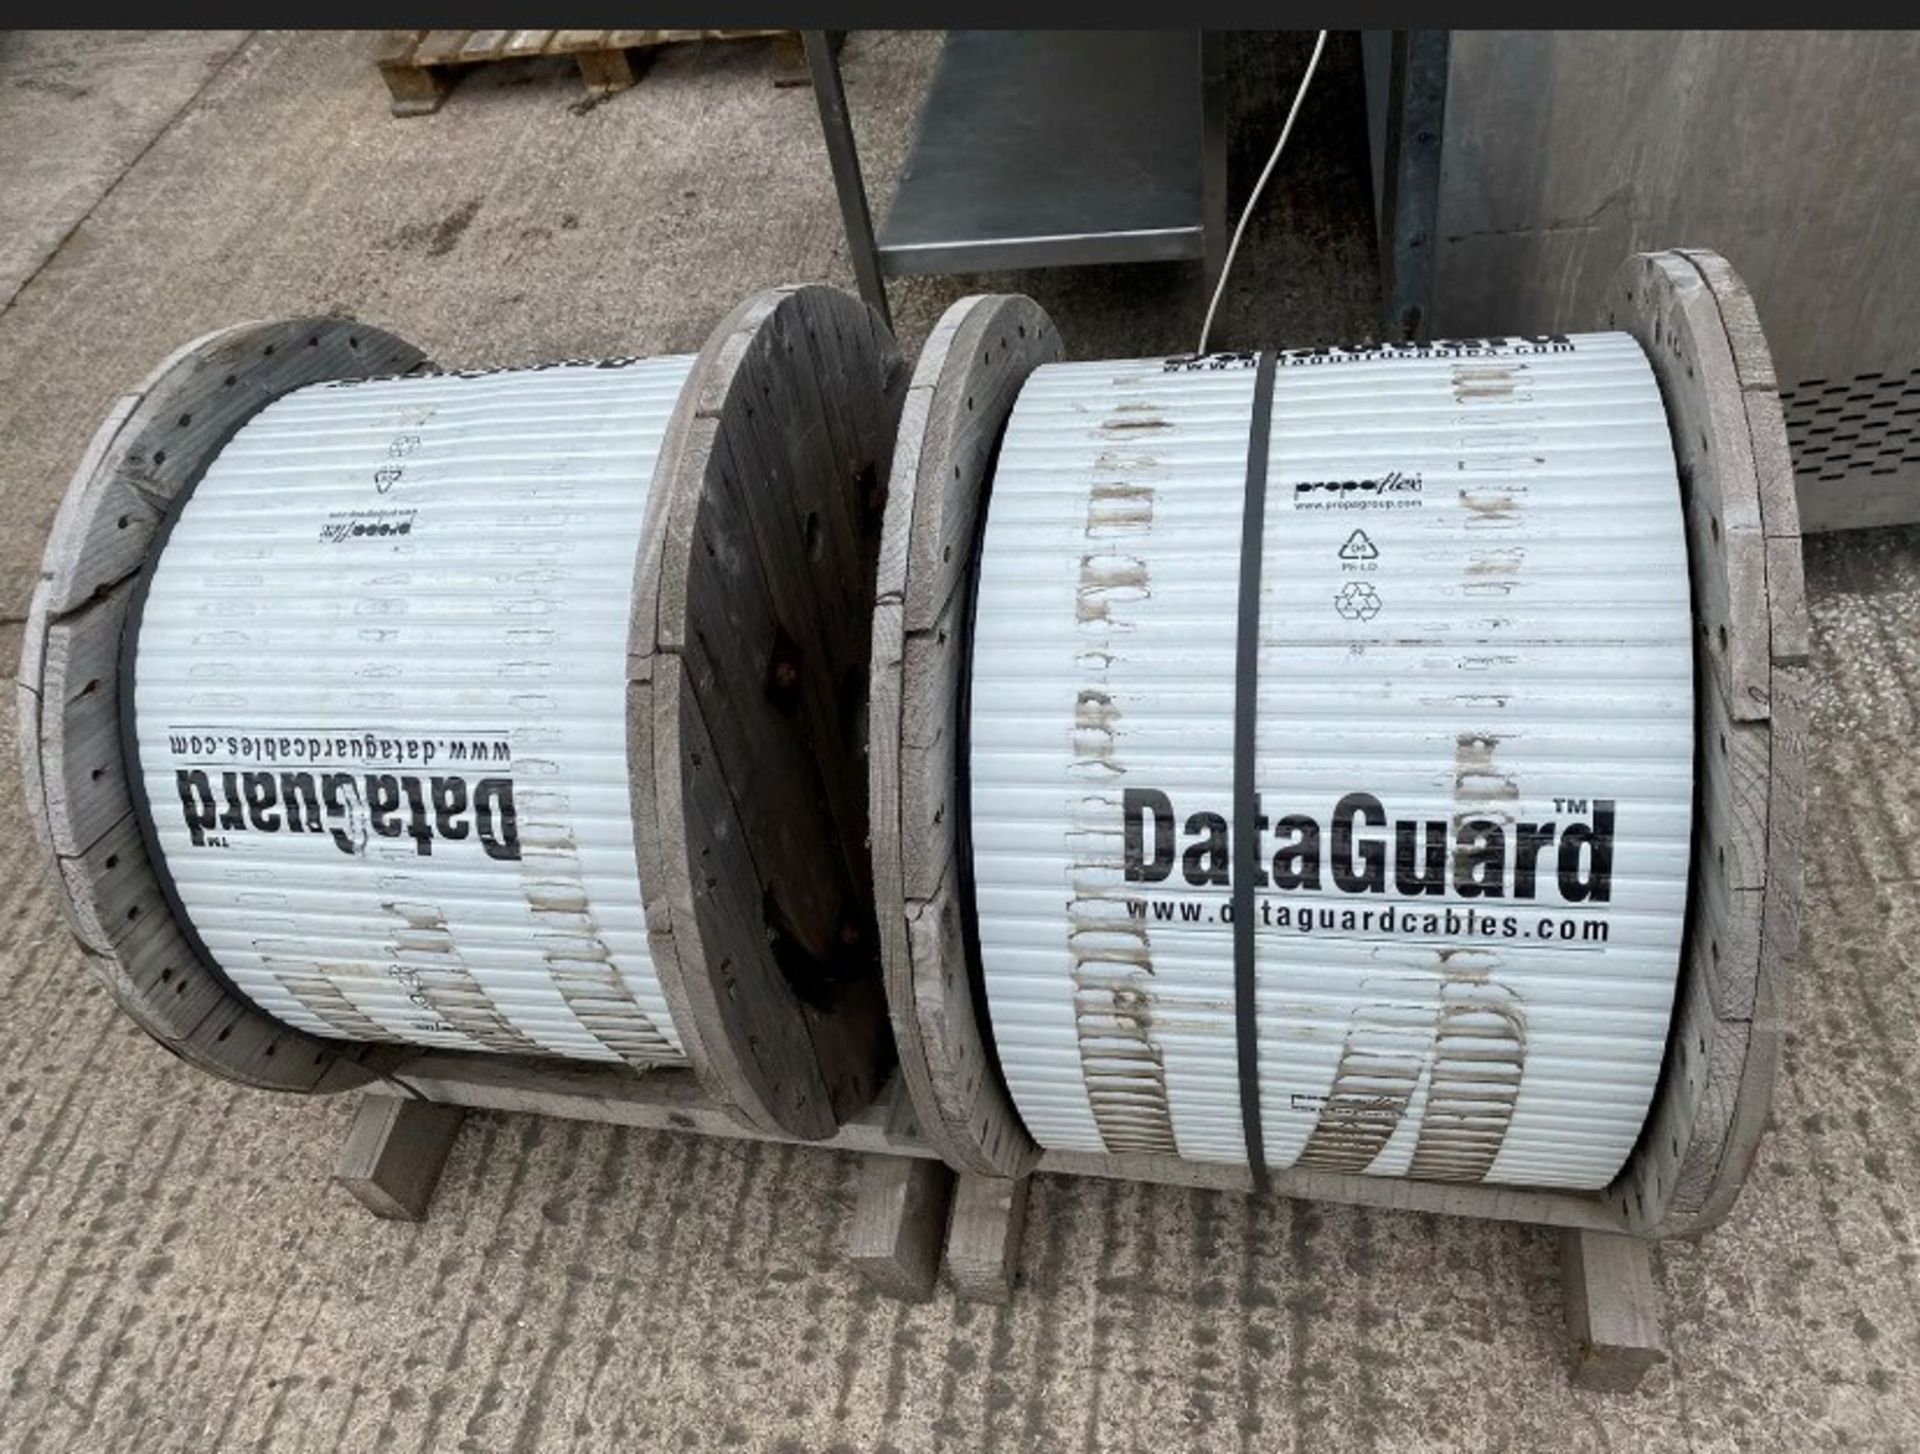 2 X 1650M DRUMS (3300M) OF BELCOM DATAGUARD SWA STEEL WIRE ARMOURED 12 CORE FIBRE OPTIC CABLE - FULL